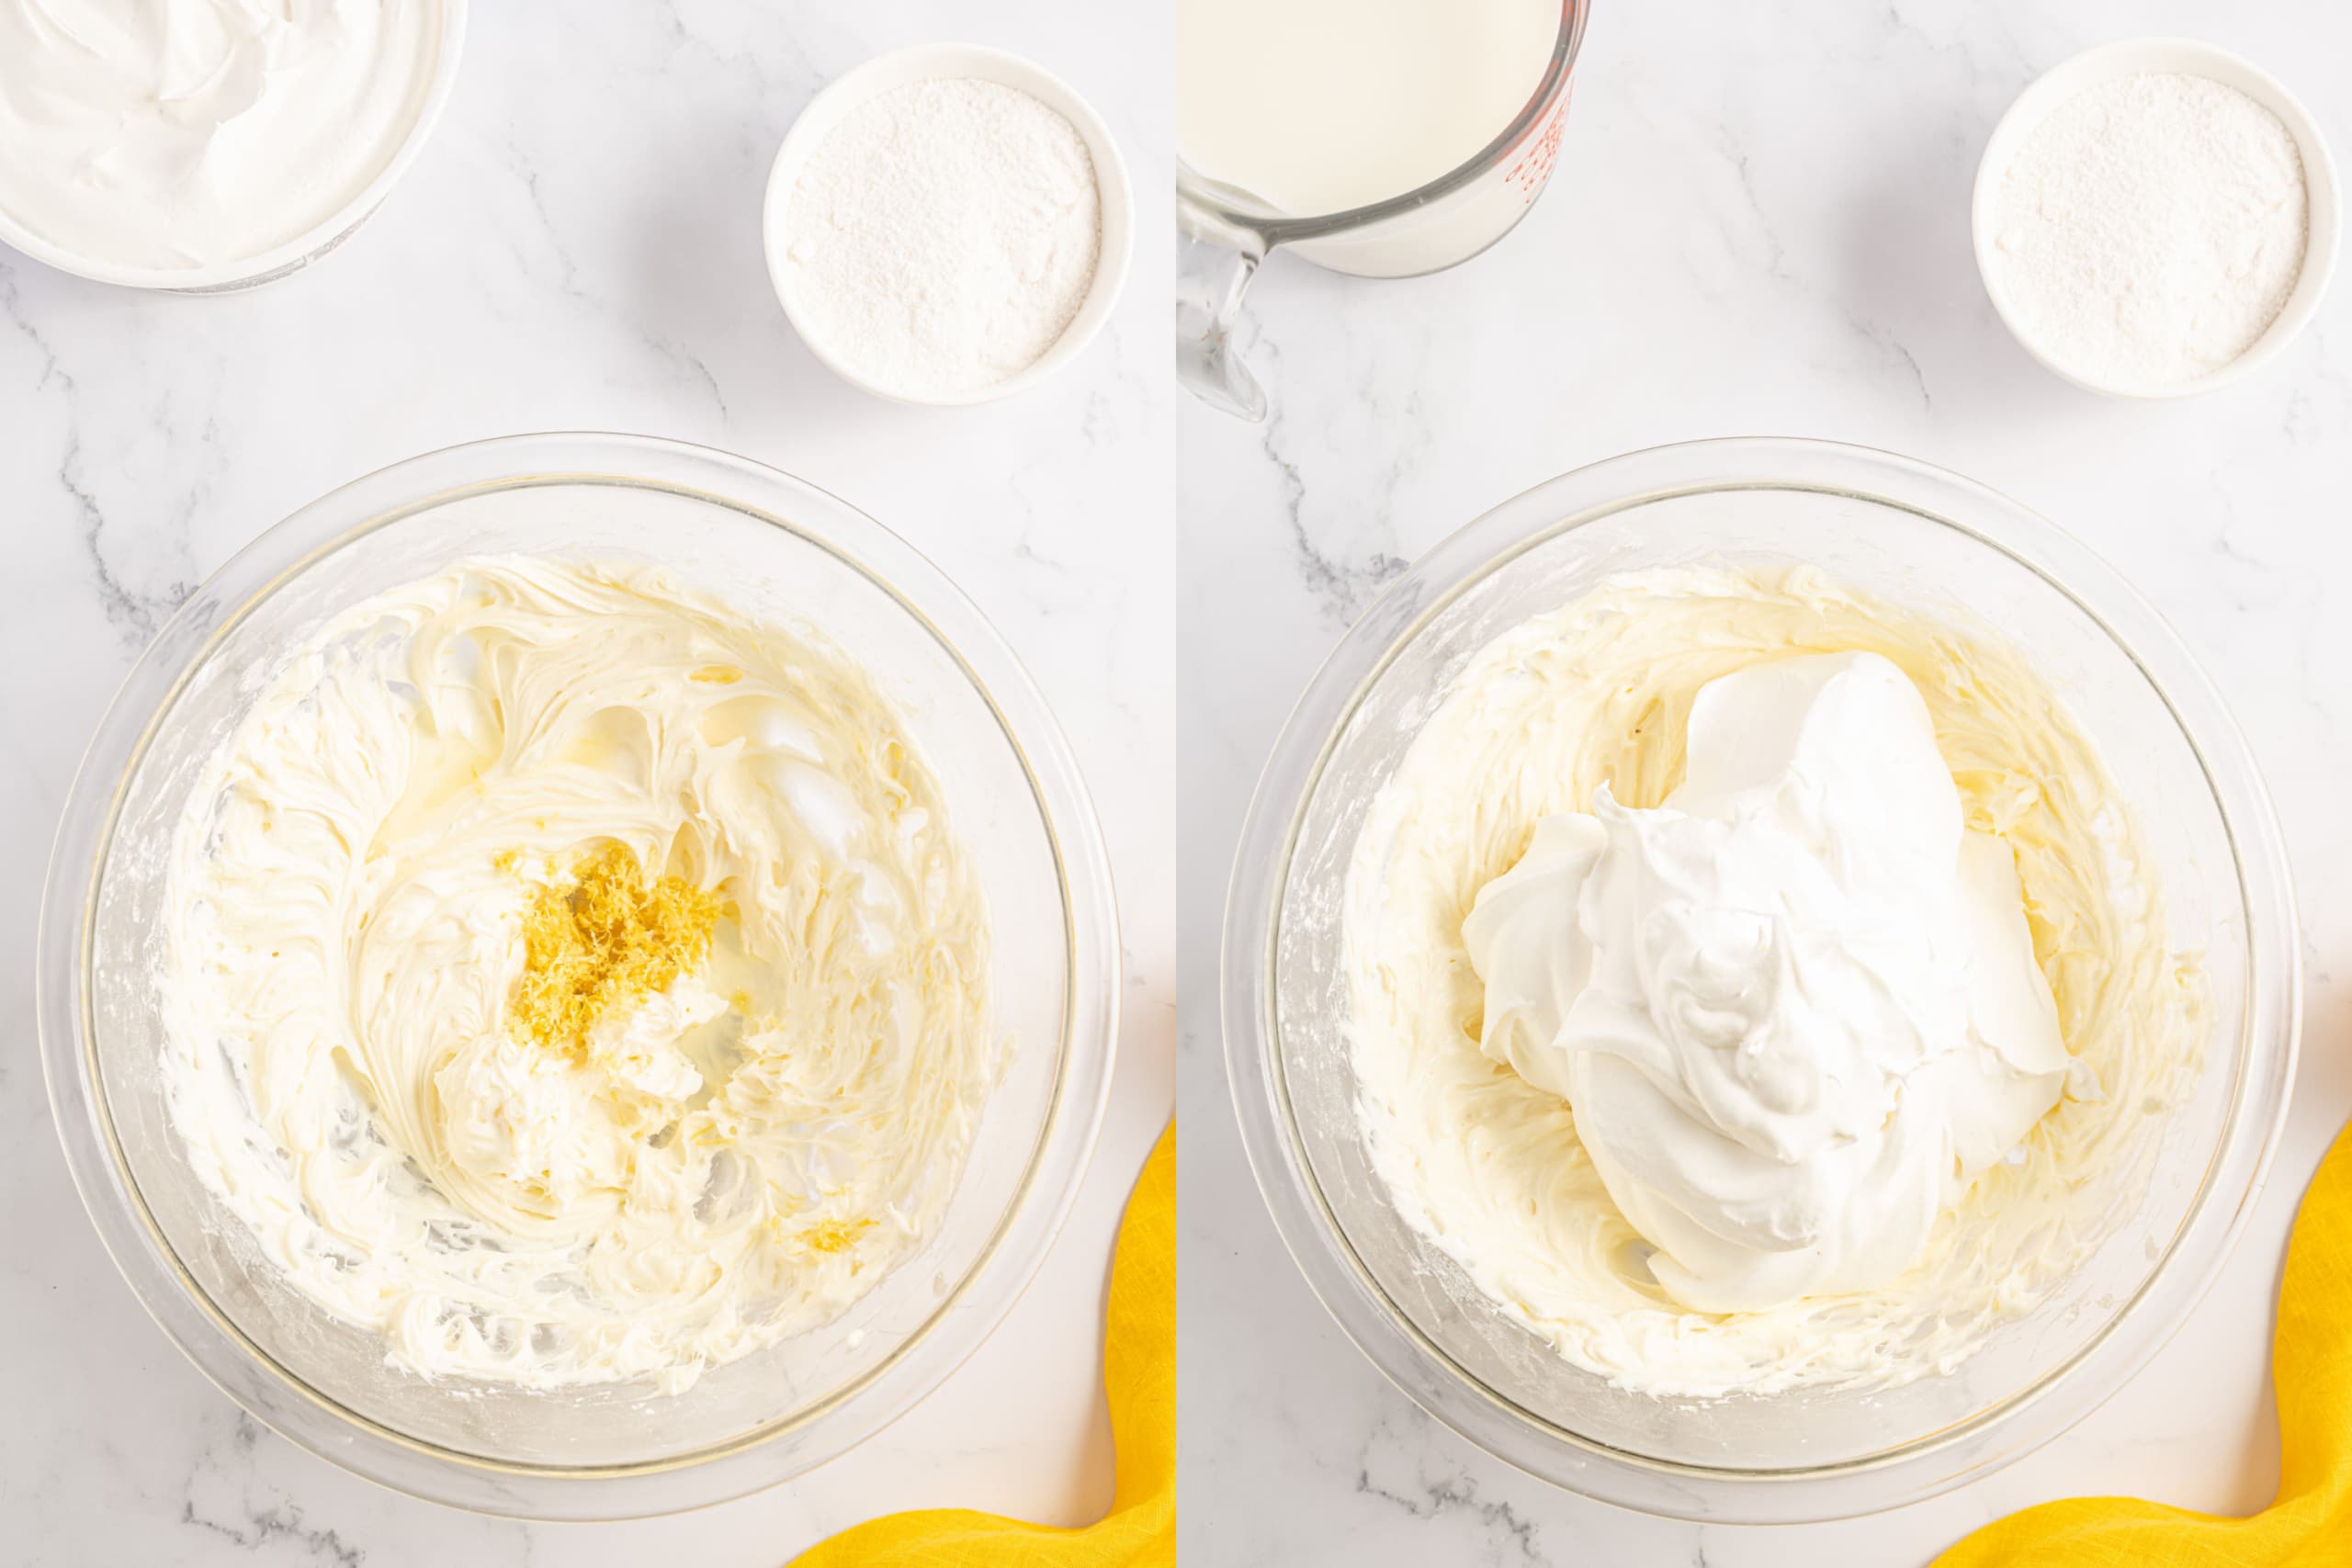 Step by step photos showing how to make lemon lush cheesecake layer.